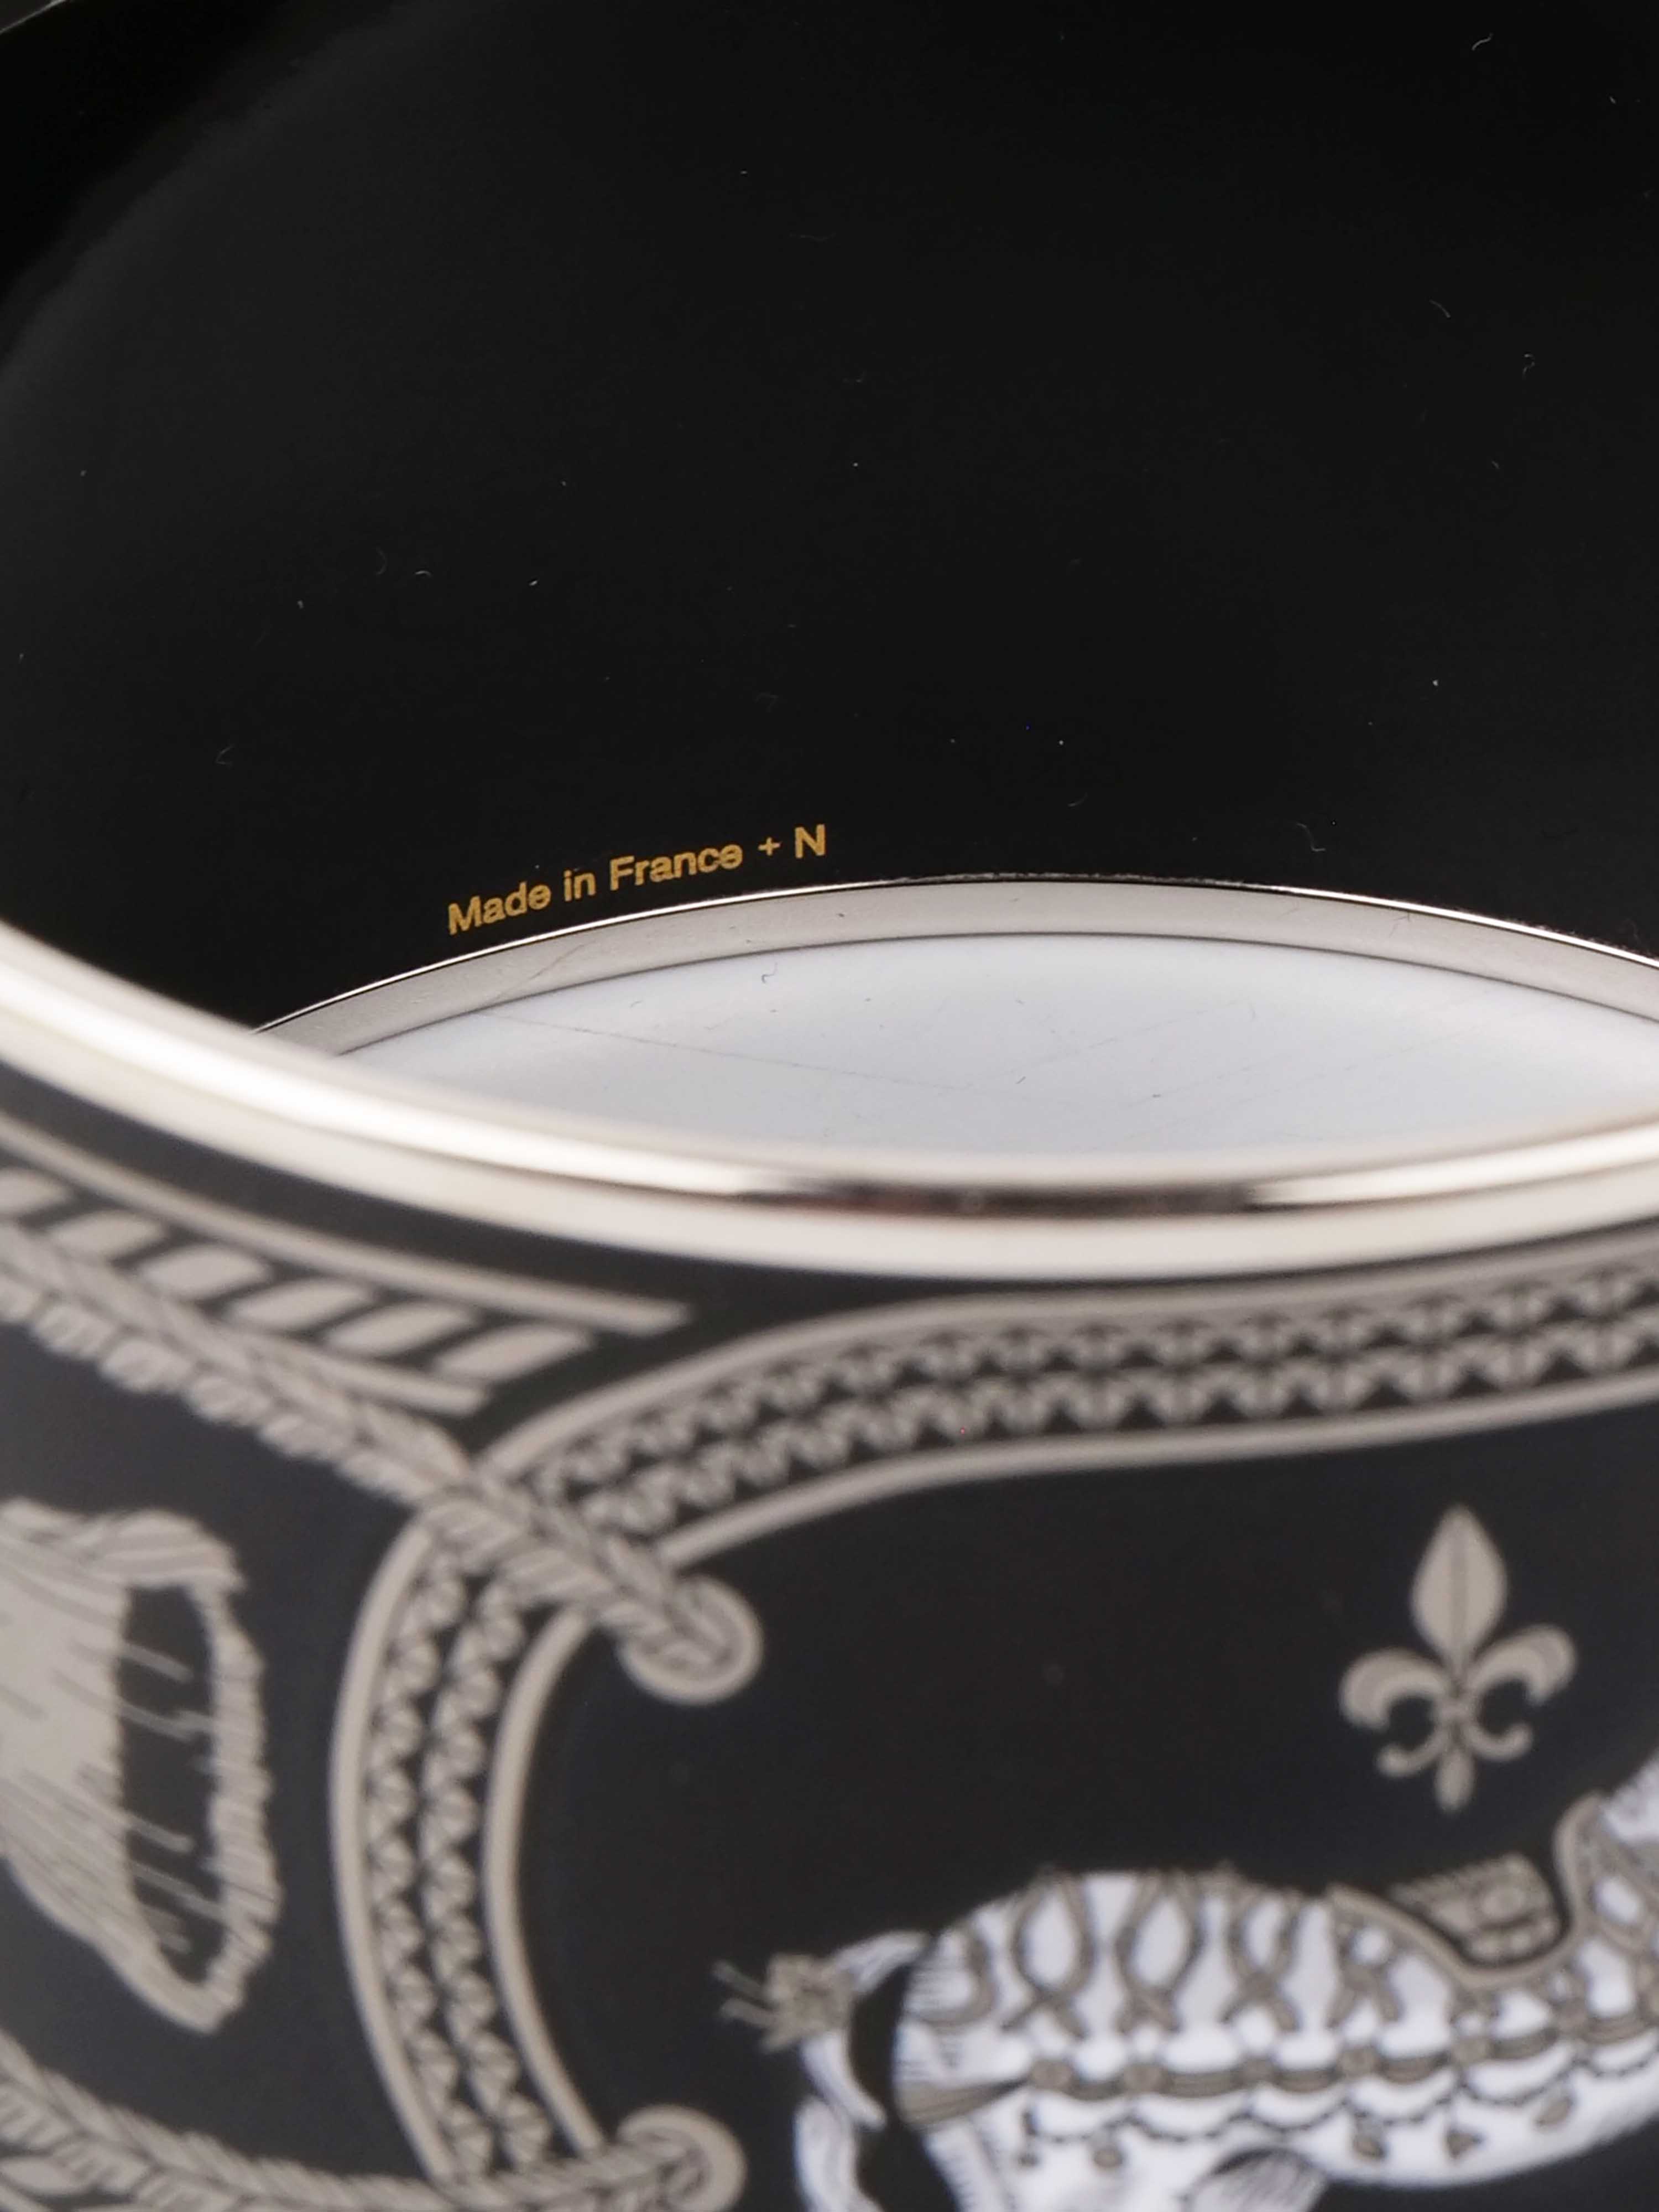 Hermes Black with Horse Design Extra Wide Bangle.